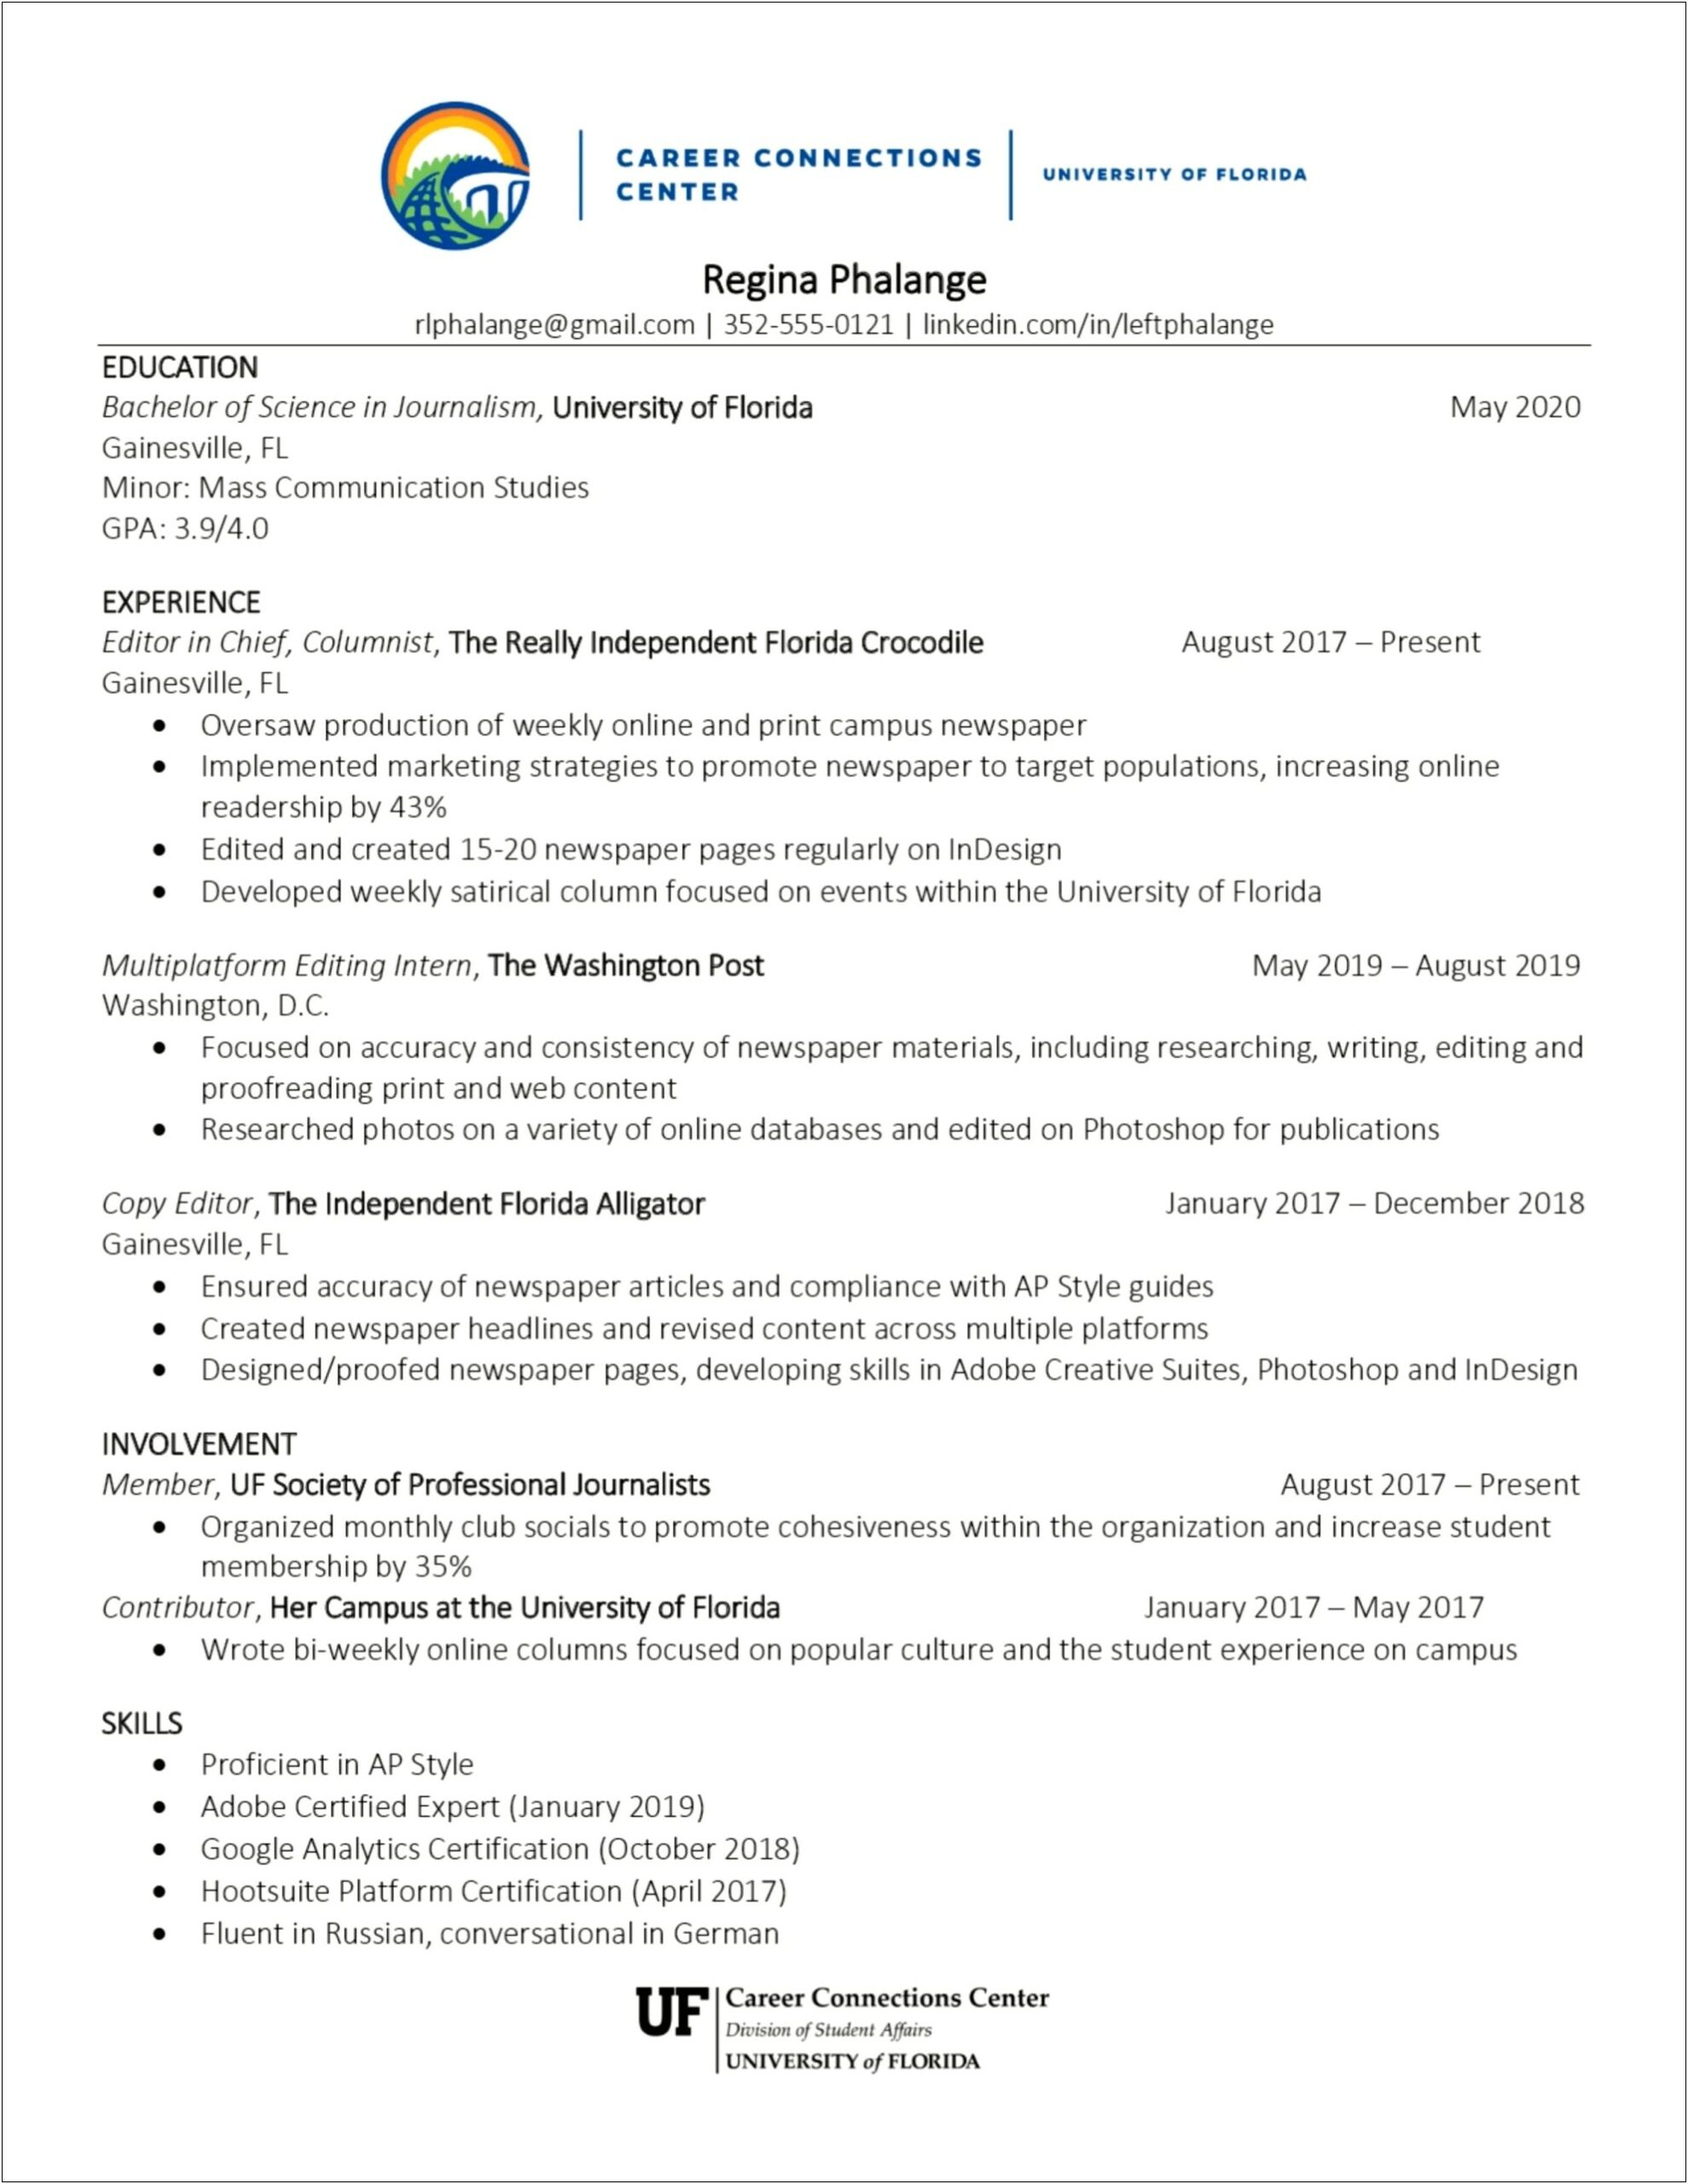 Cultural Competency As Resume Skill